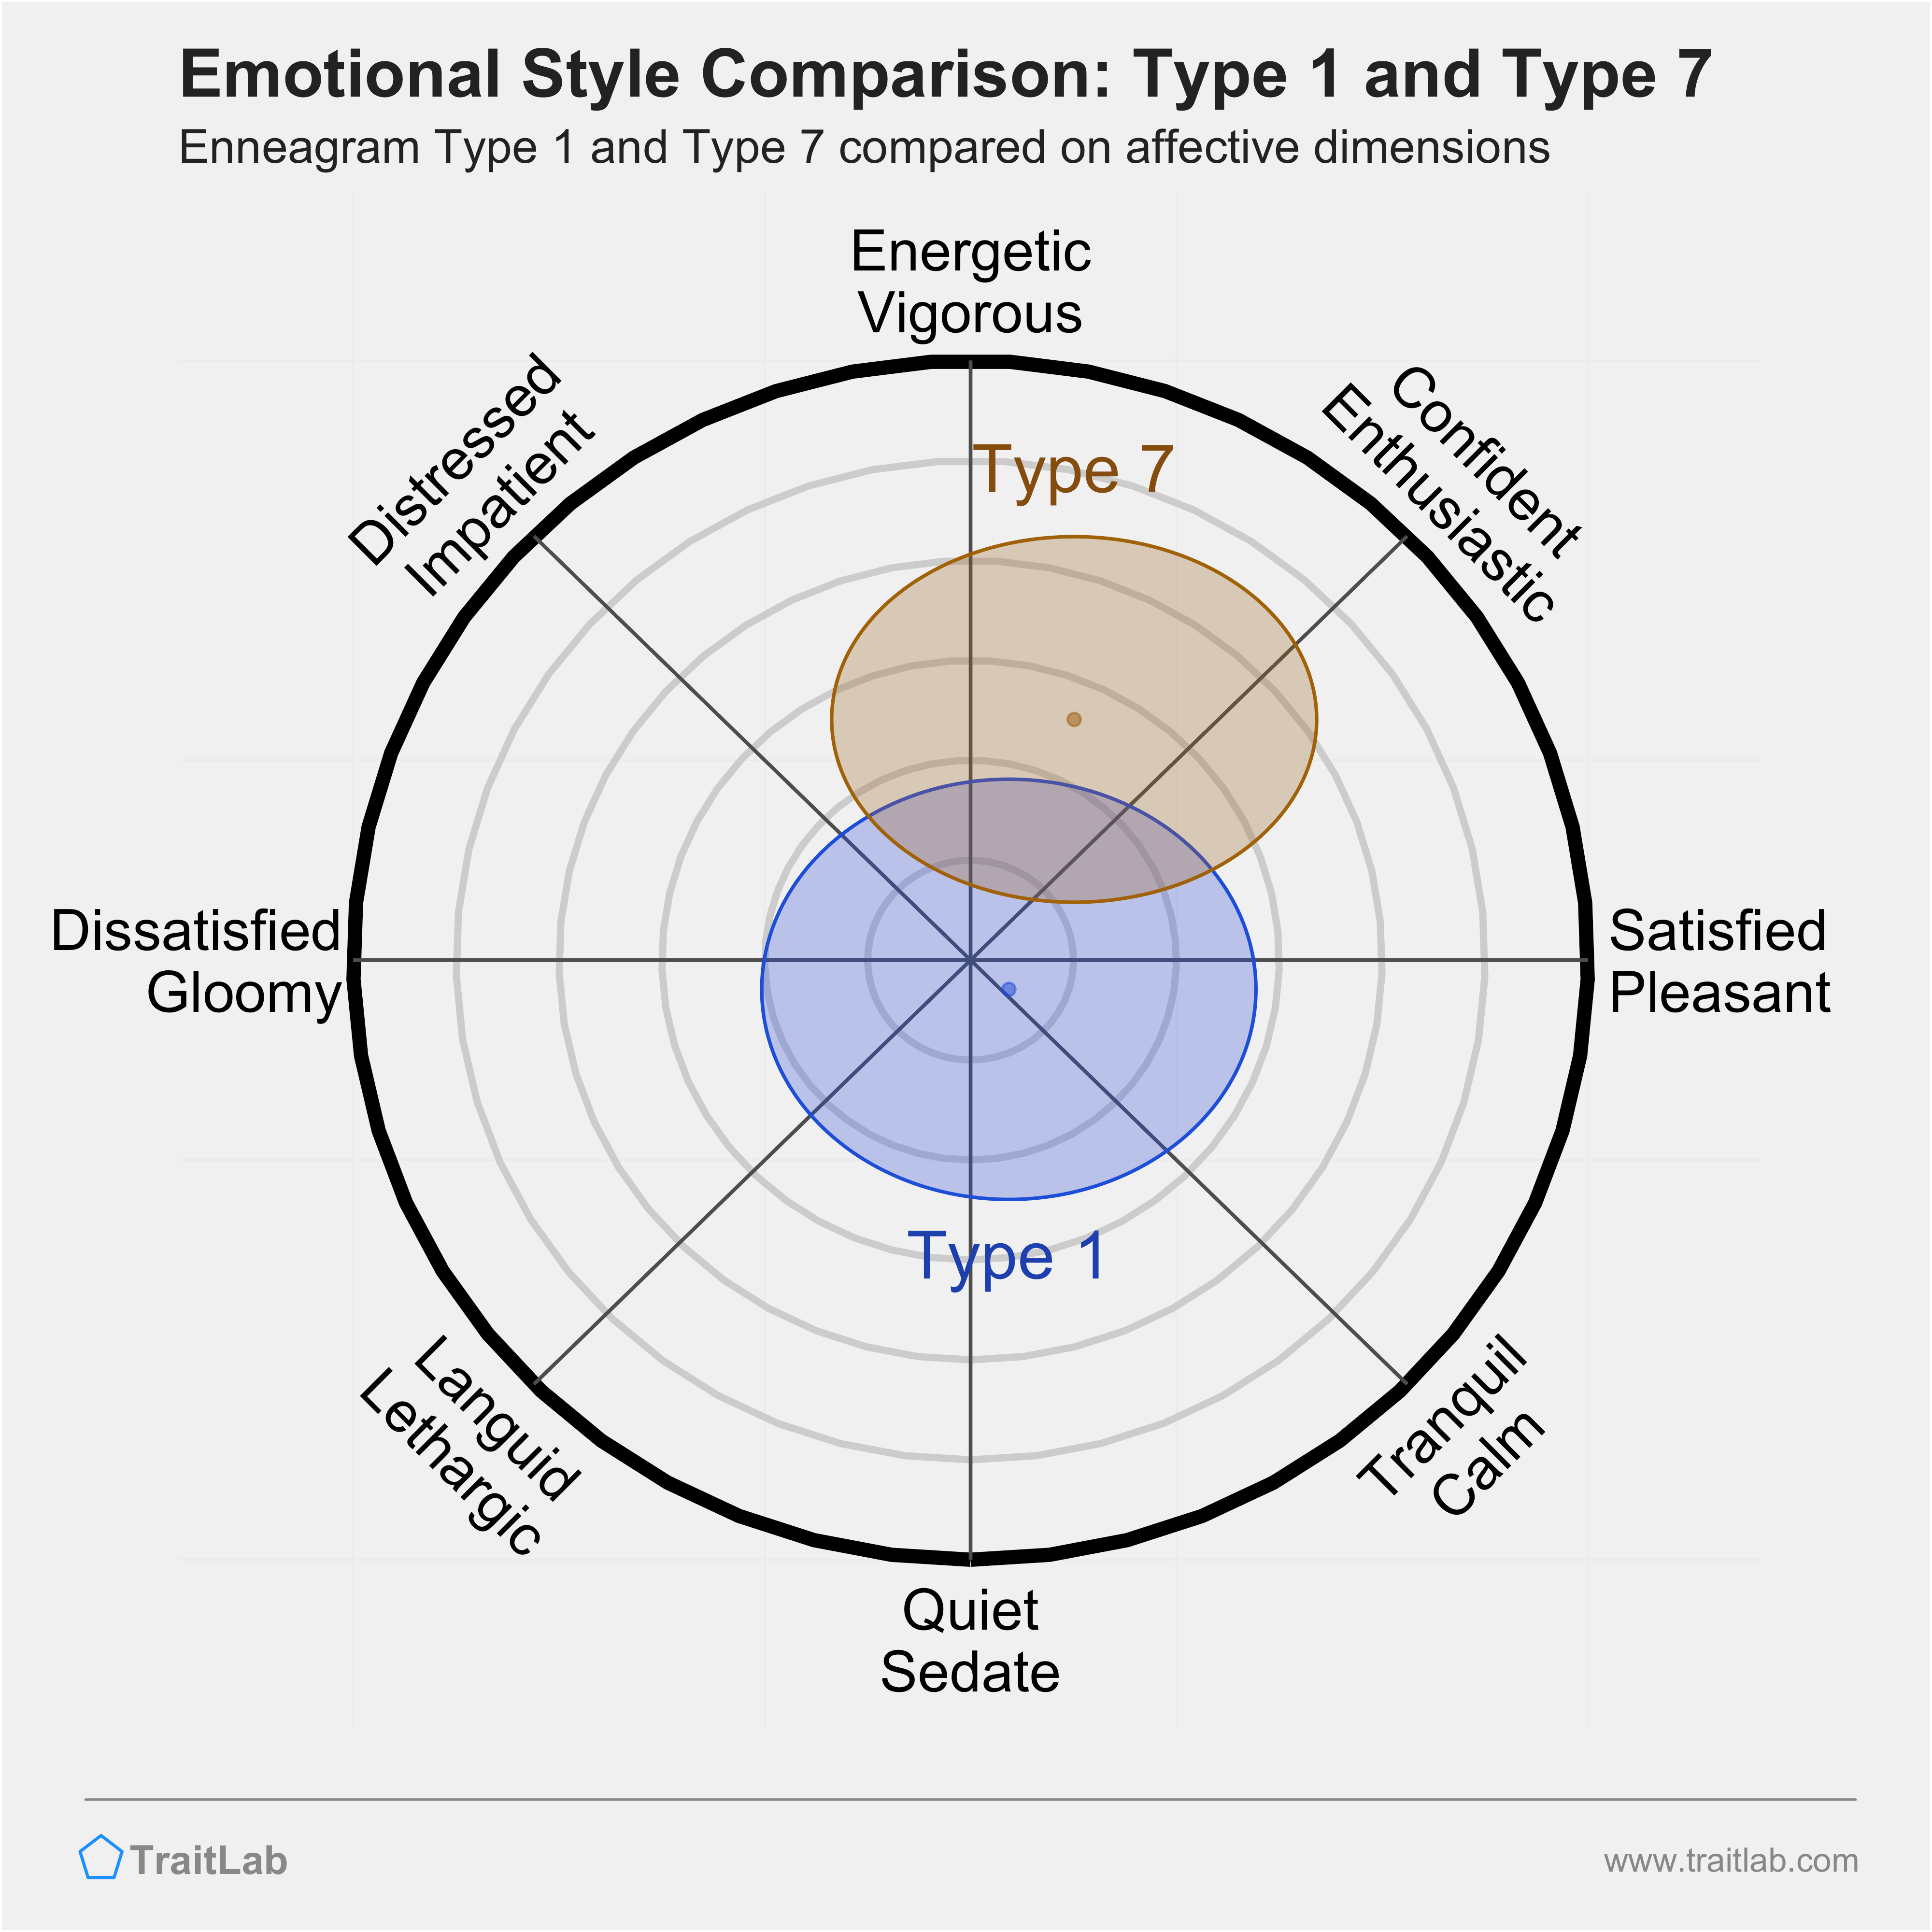 Type 1 and Type 7 comparison across emotional (affective) dimensions